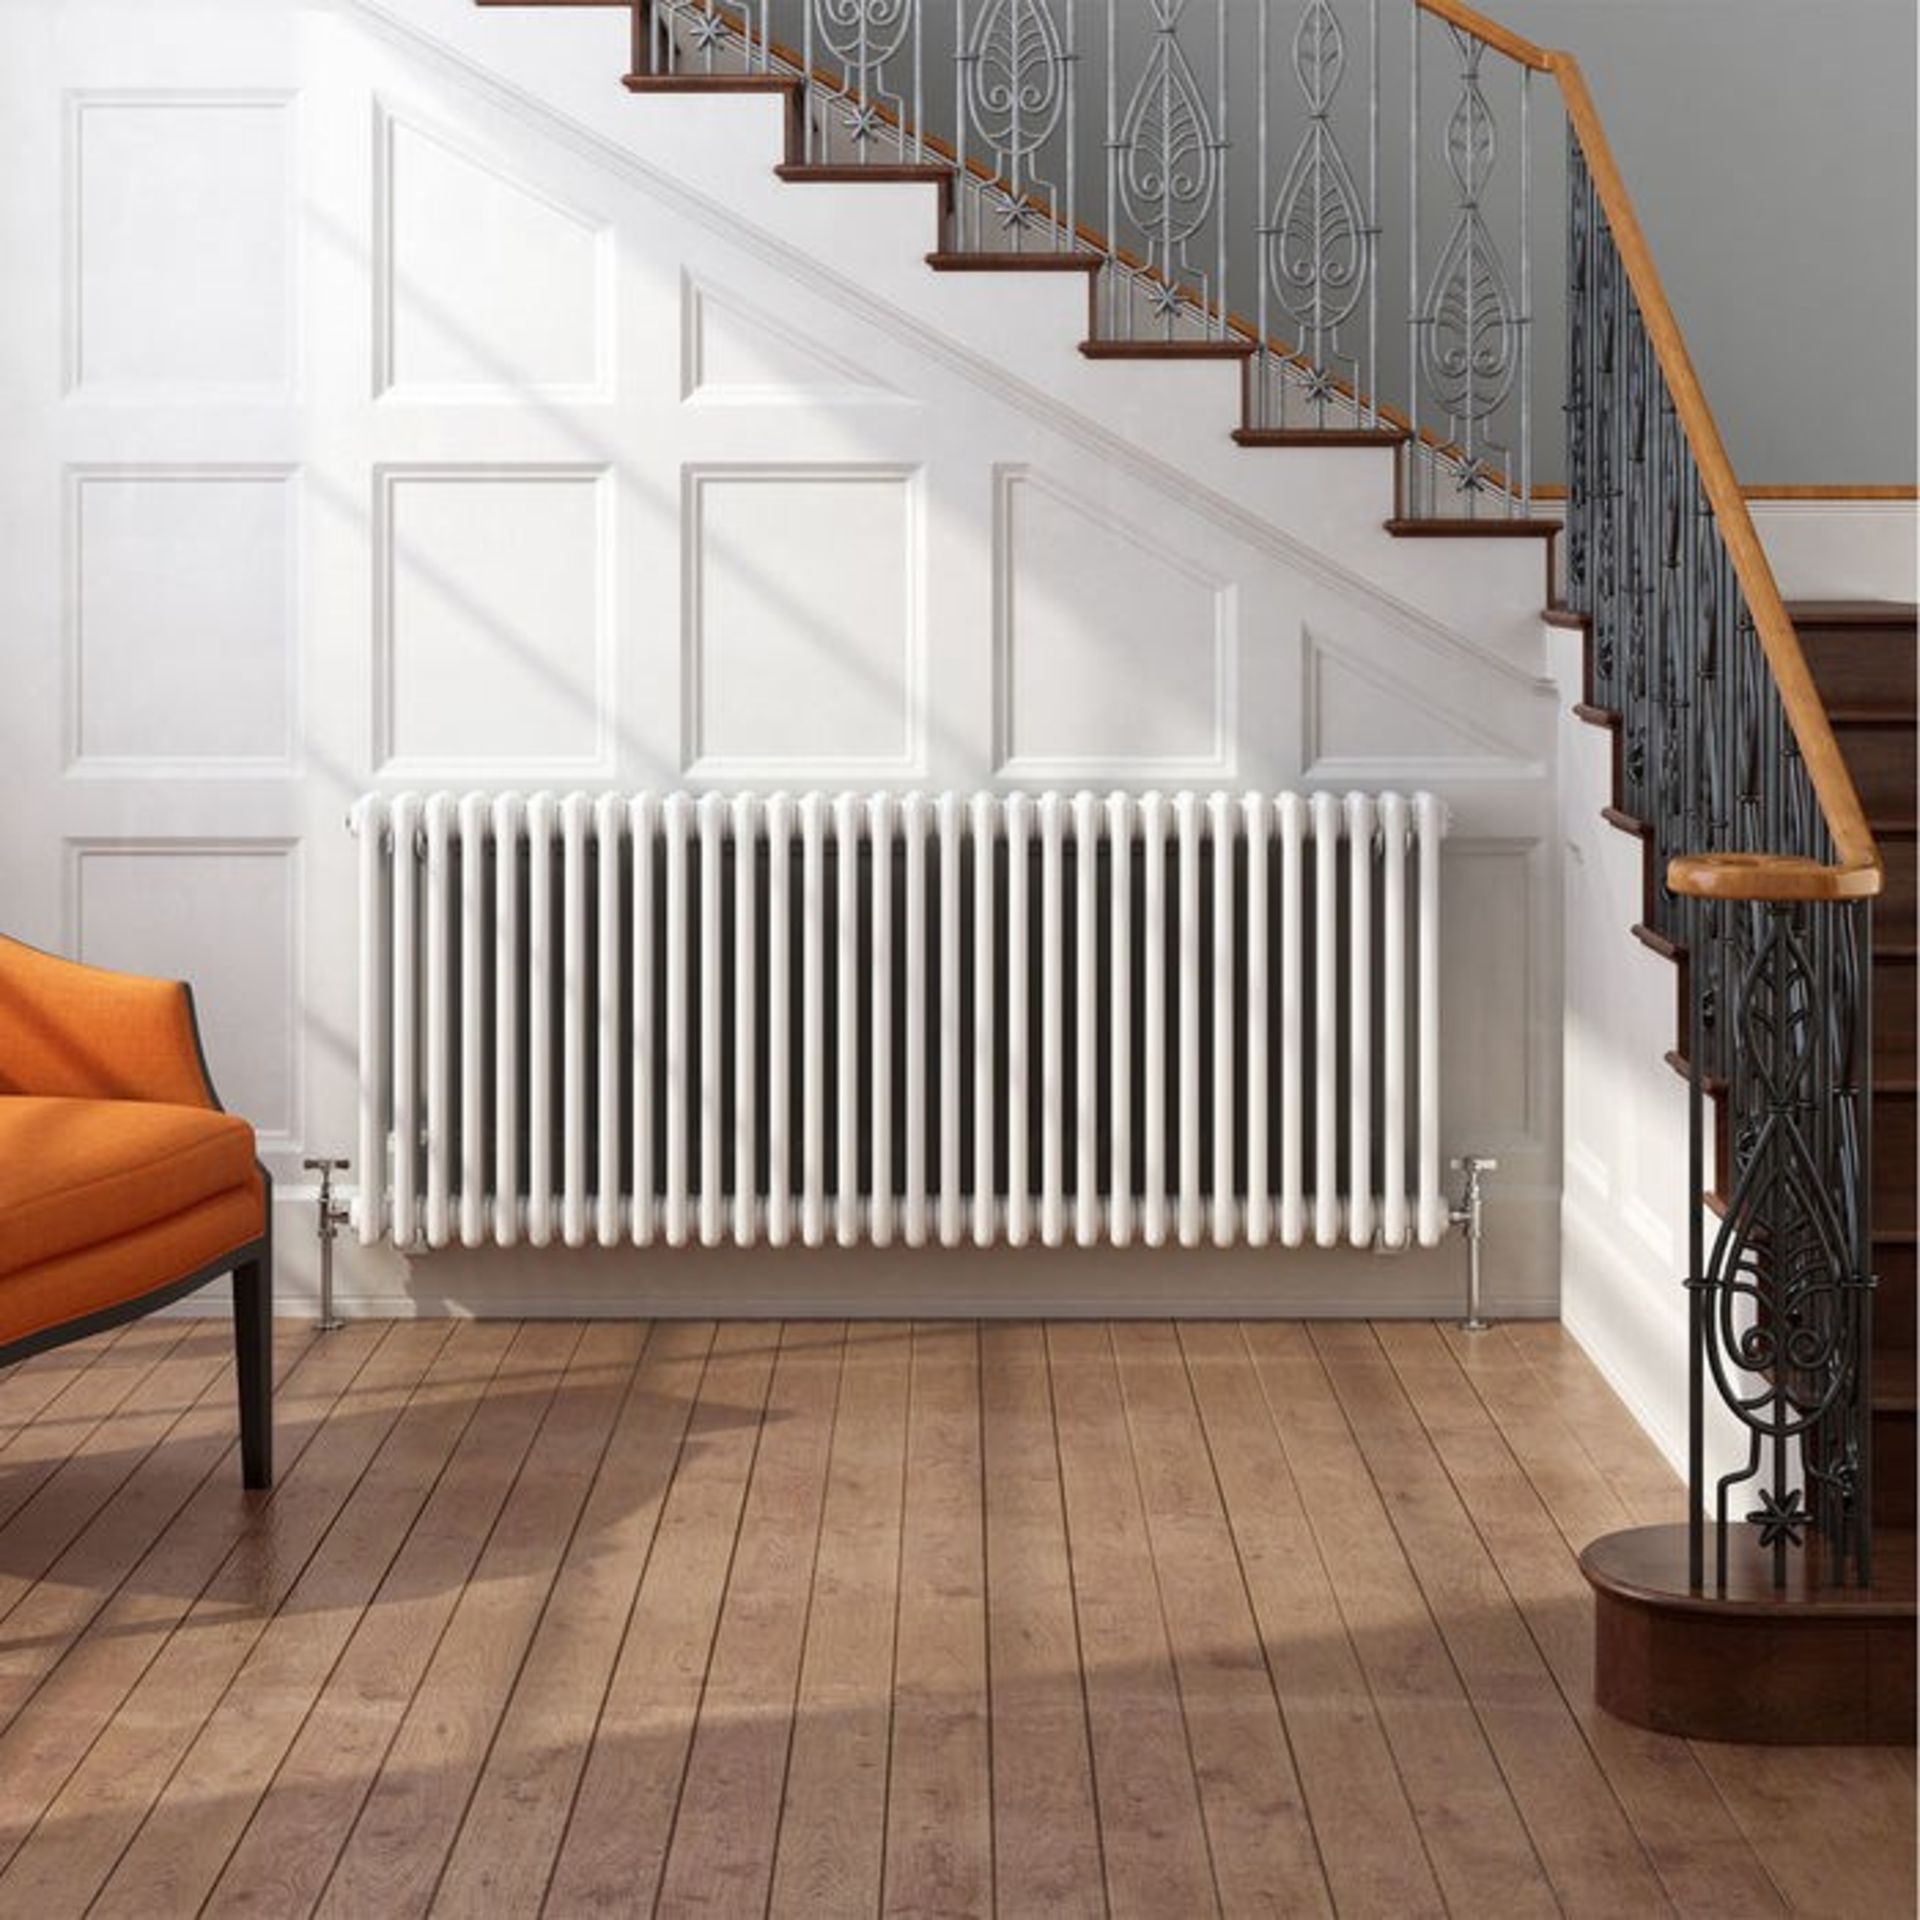 (UR148) 600x1410mm White Double Panel Horizontal Colosseum Traditional Radiator. RRP £552.99. ... - Image 2 of 4